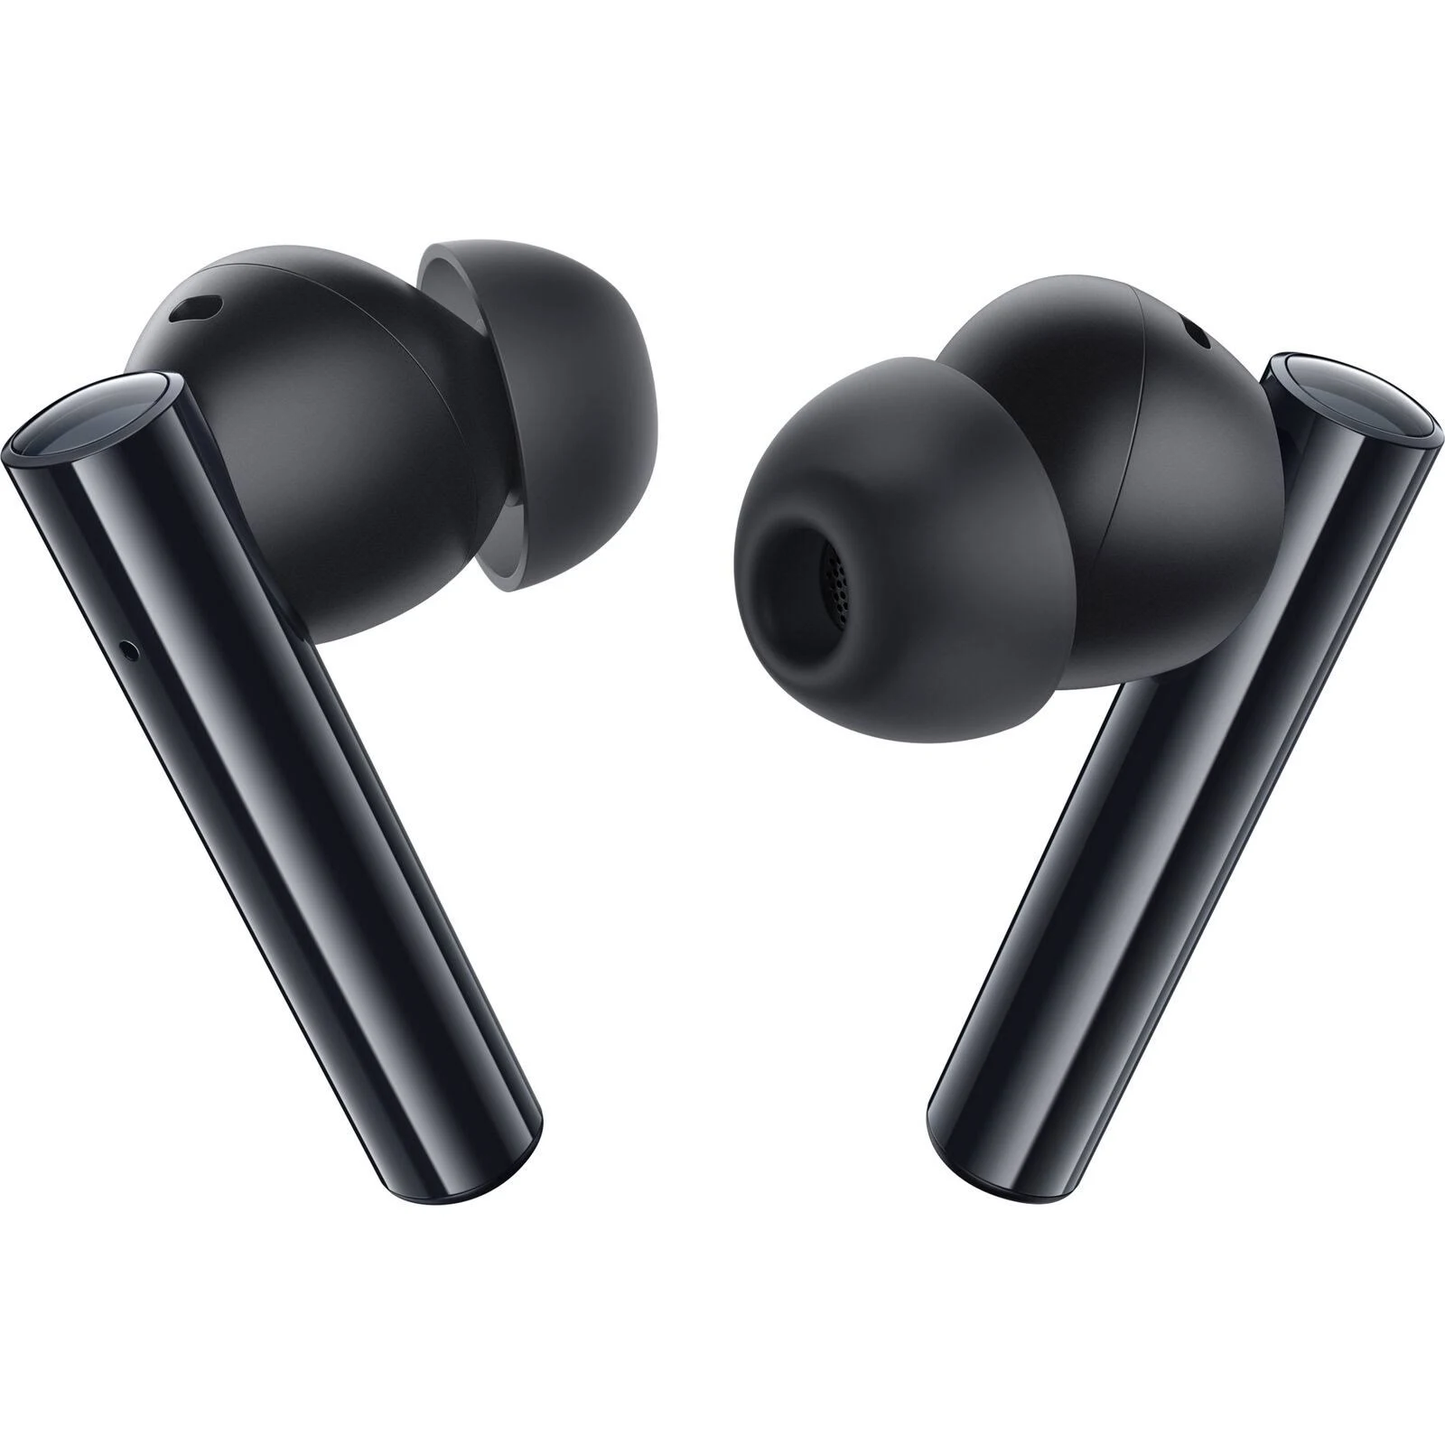 realme Buds Air 2 True Wireless in Ear Earbuds with Active Noise Cancellation (ANC)